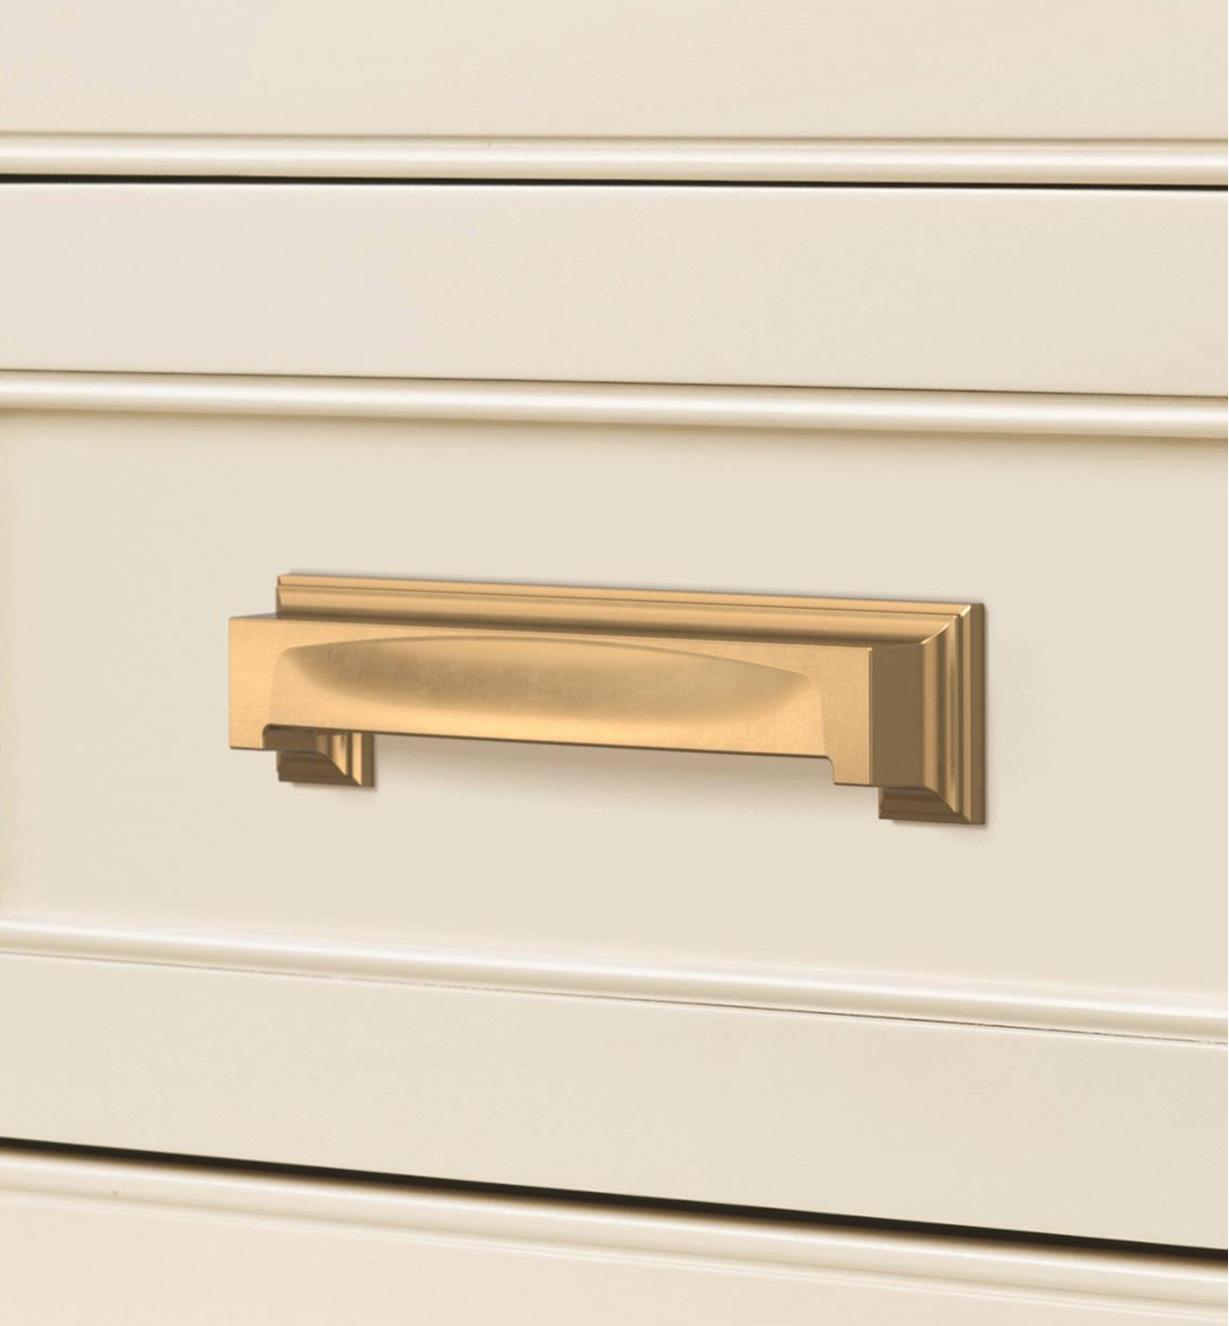 A champagne bronze Appoint cup pull connected horizontally to a white drawer